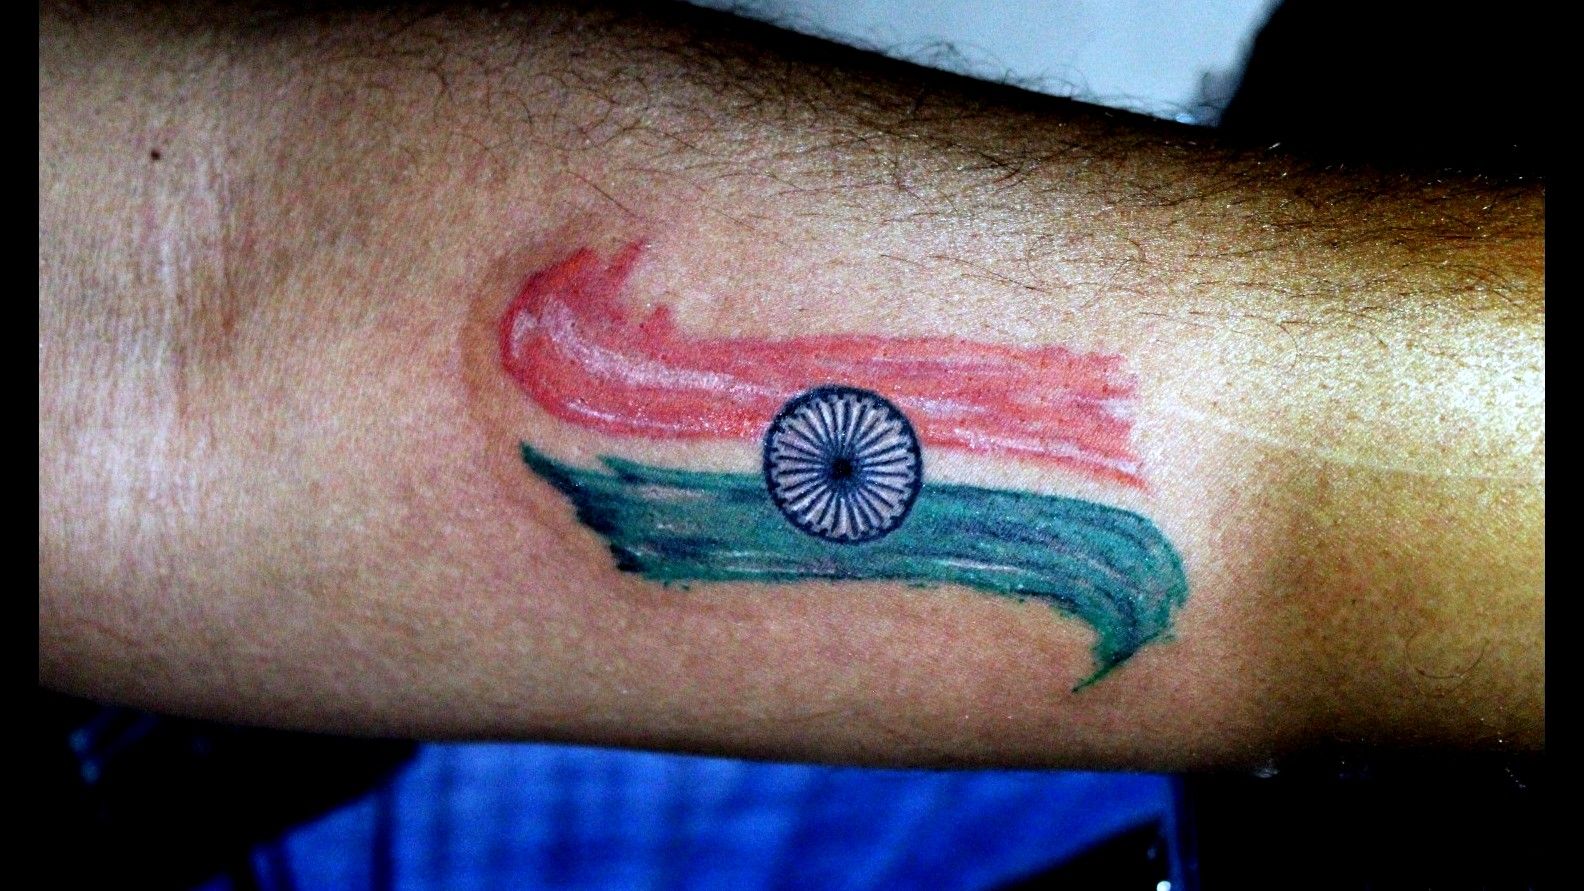 Details more than 84 indian flag tattoo designs best  thtantai2